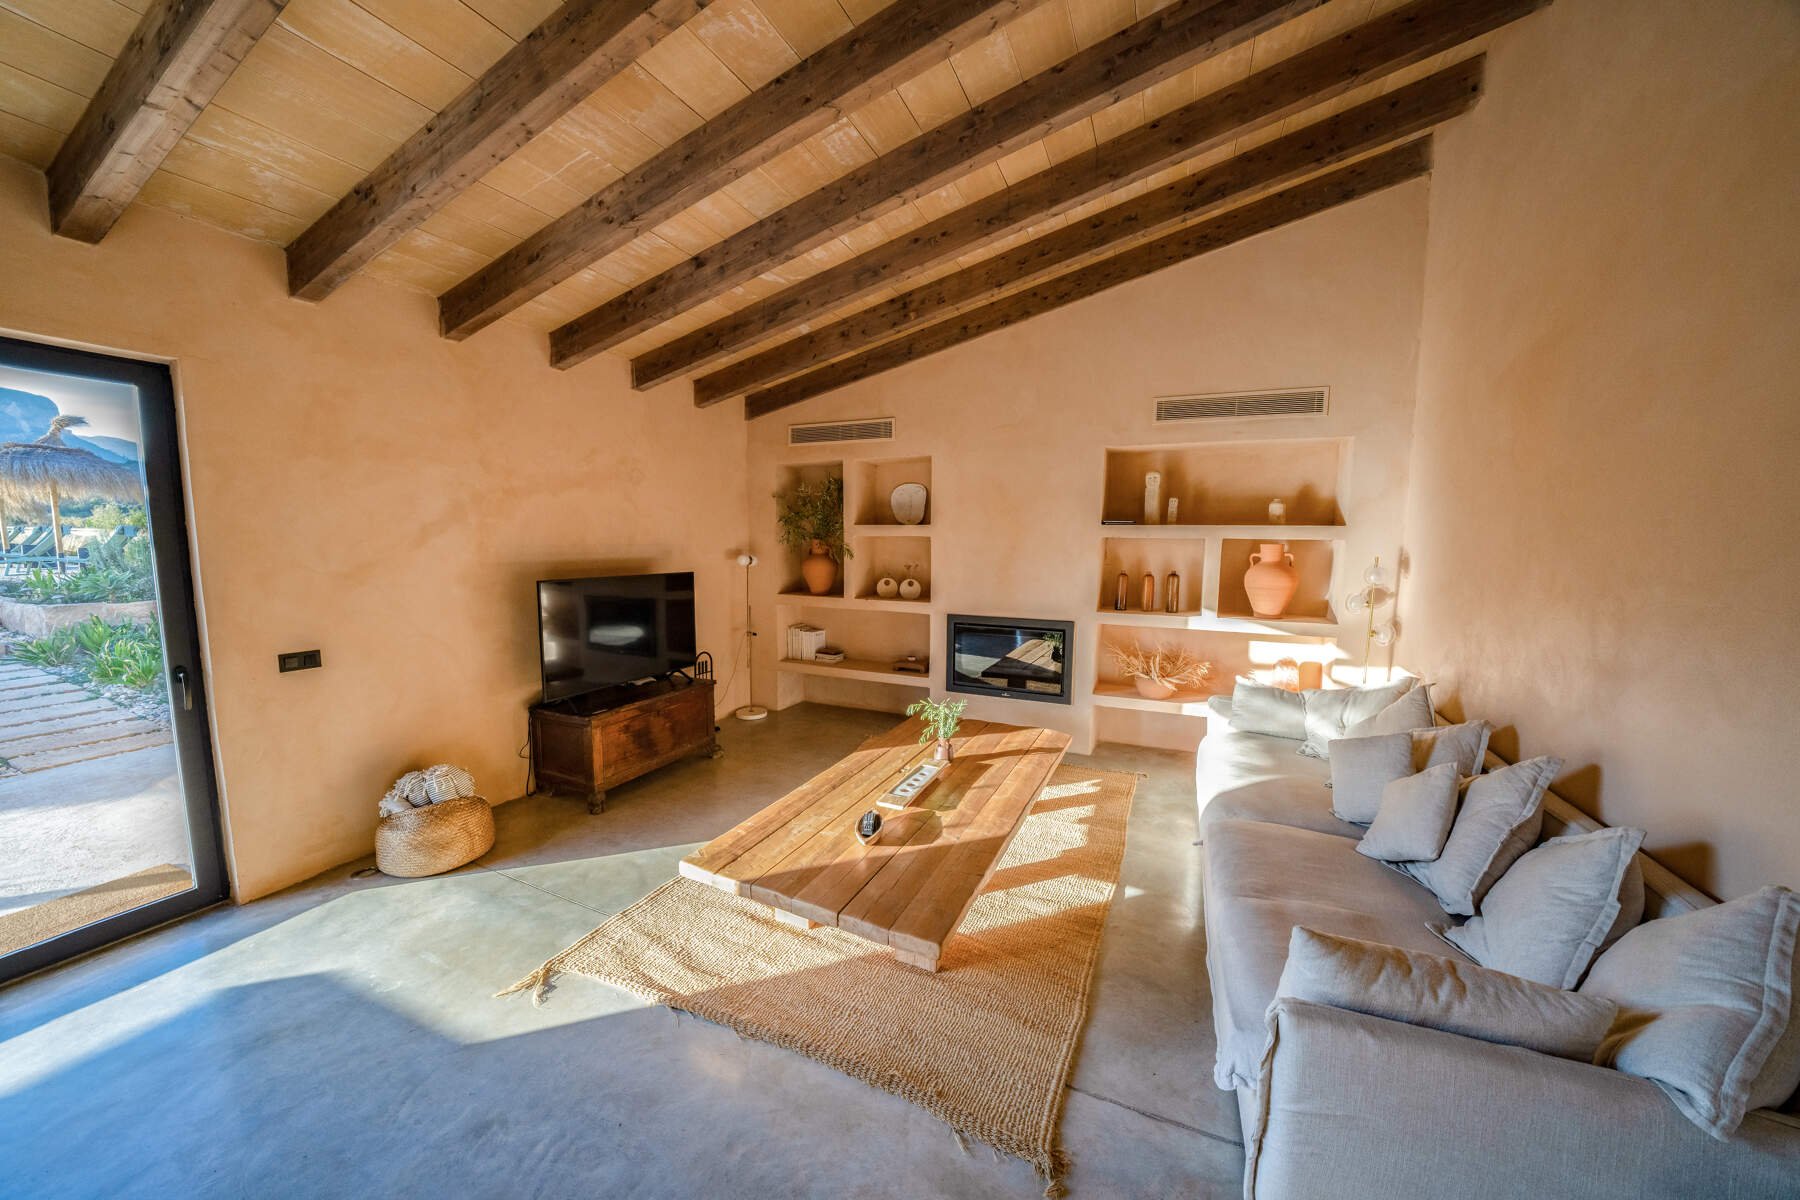 Francis York Le Collectionist Luxury Villa Rental in the Heart of Mallorca  9.jpg